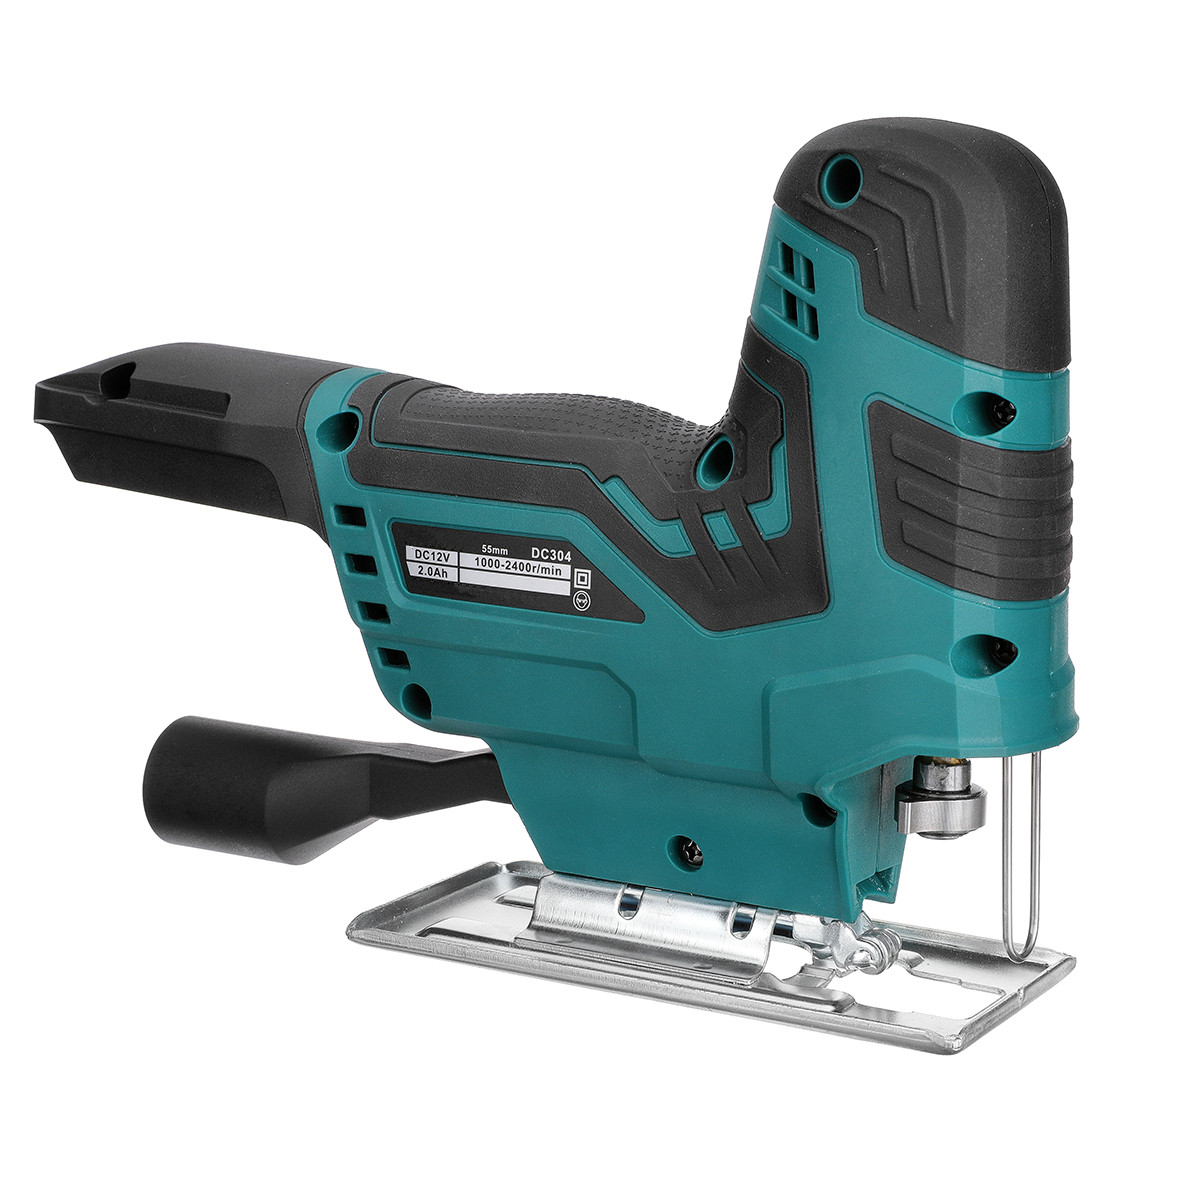 Drillpro-6-Speeds-55mm-2400RPM-Cordless-Jigsaw-Electric-Jig-Saw-Multi-function-Woodworking-Power-Too-1937968-9